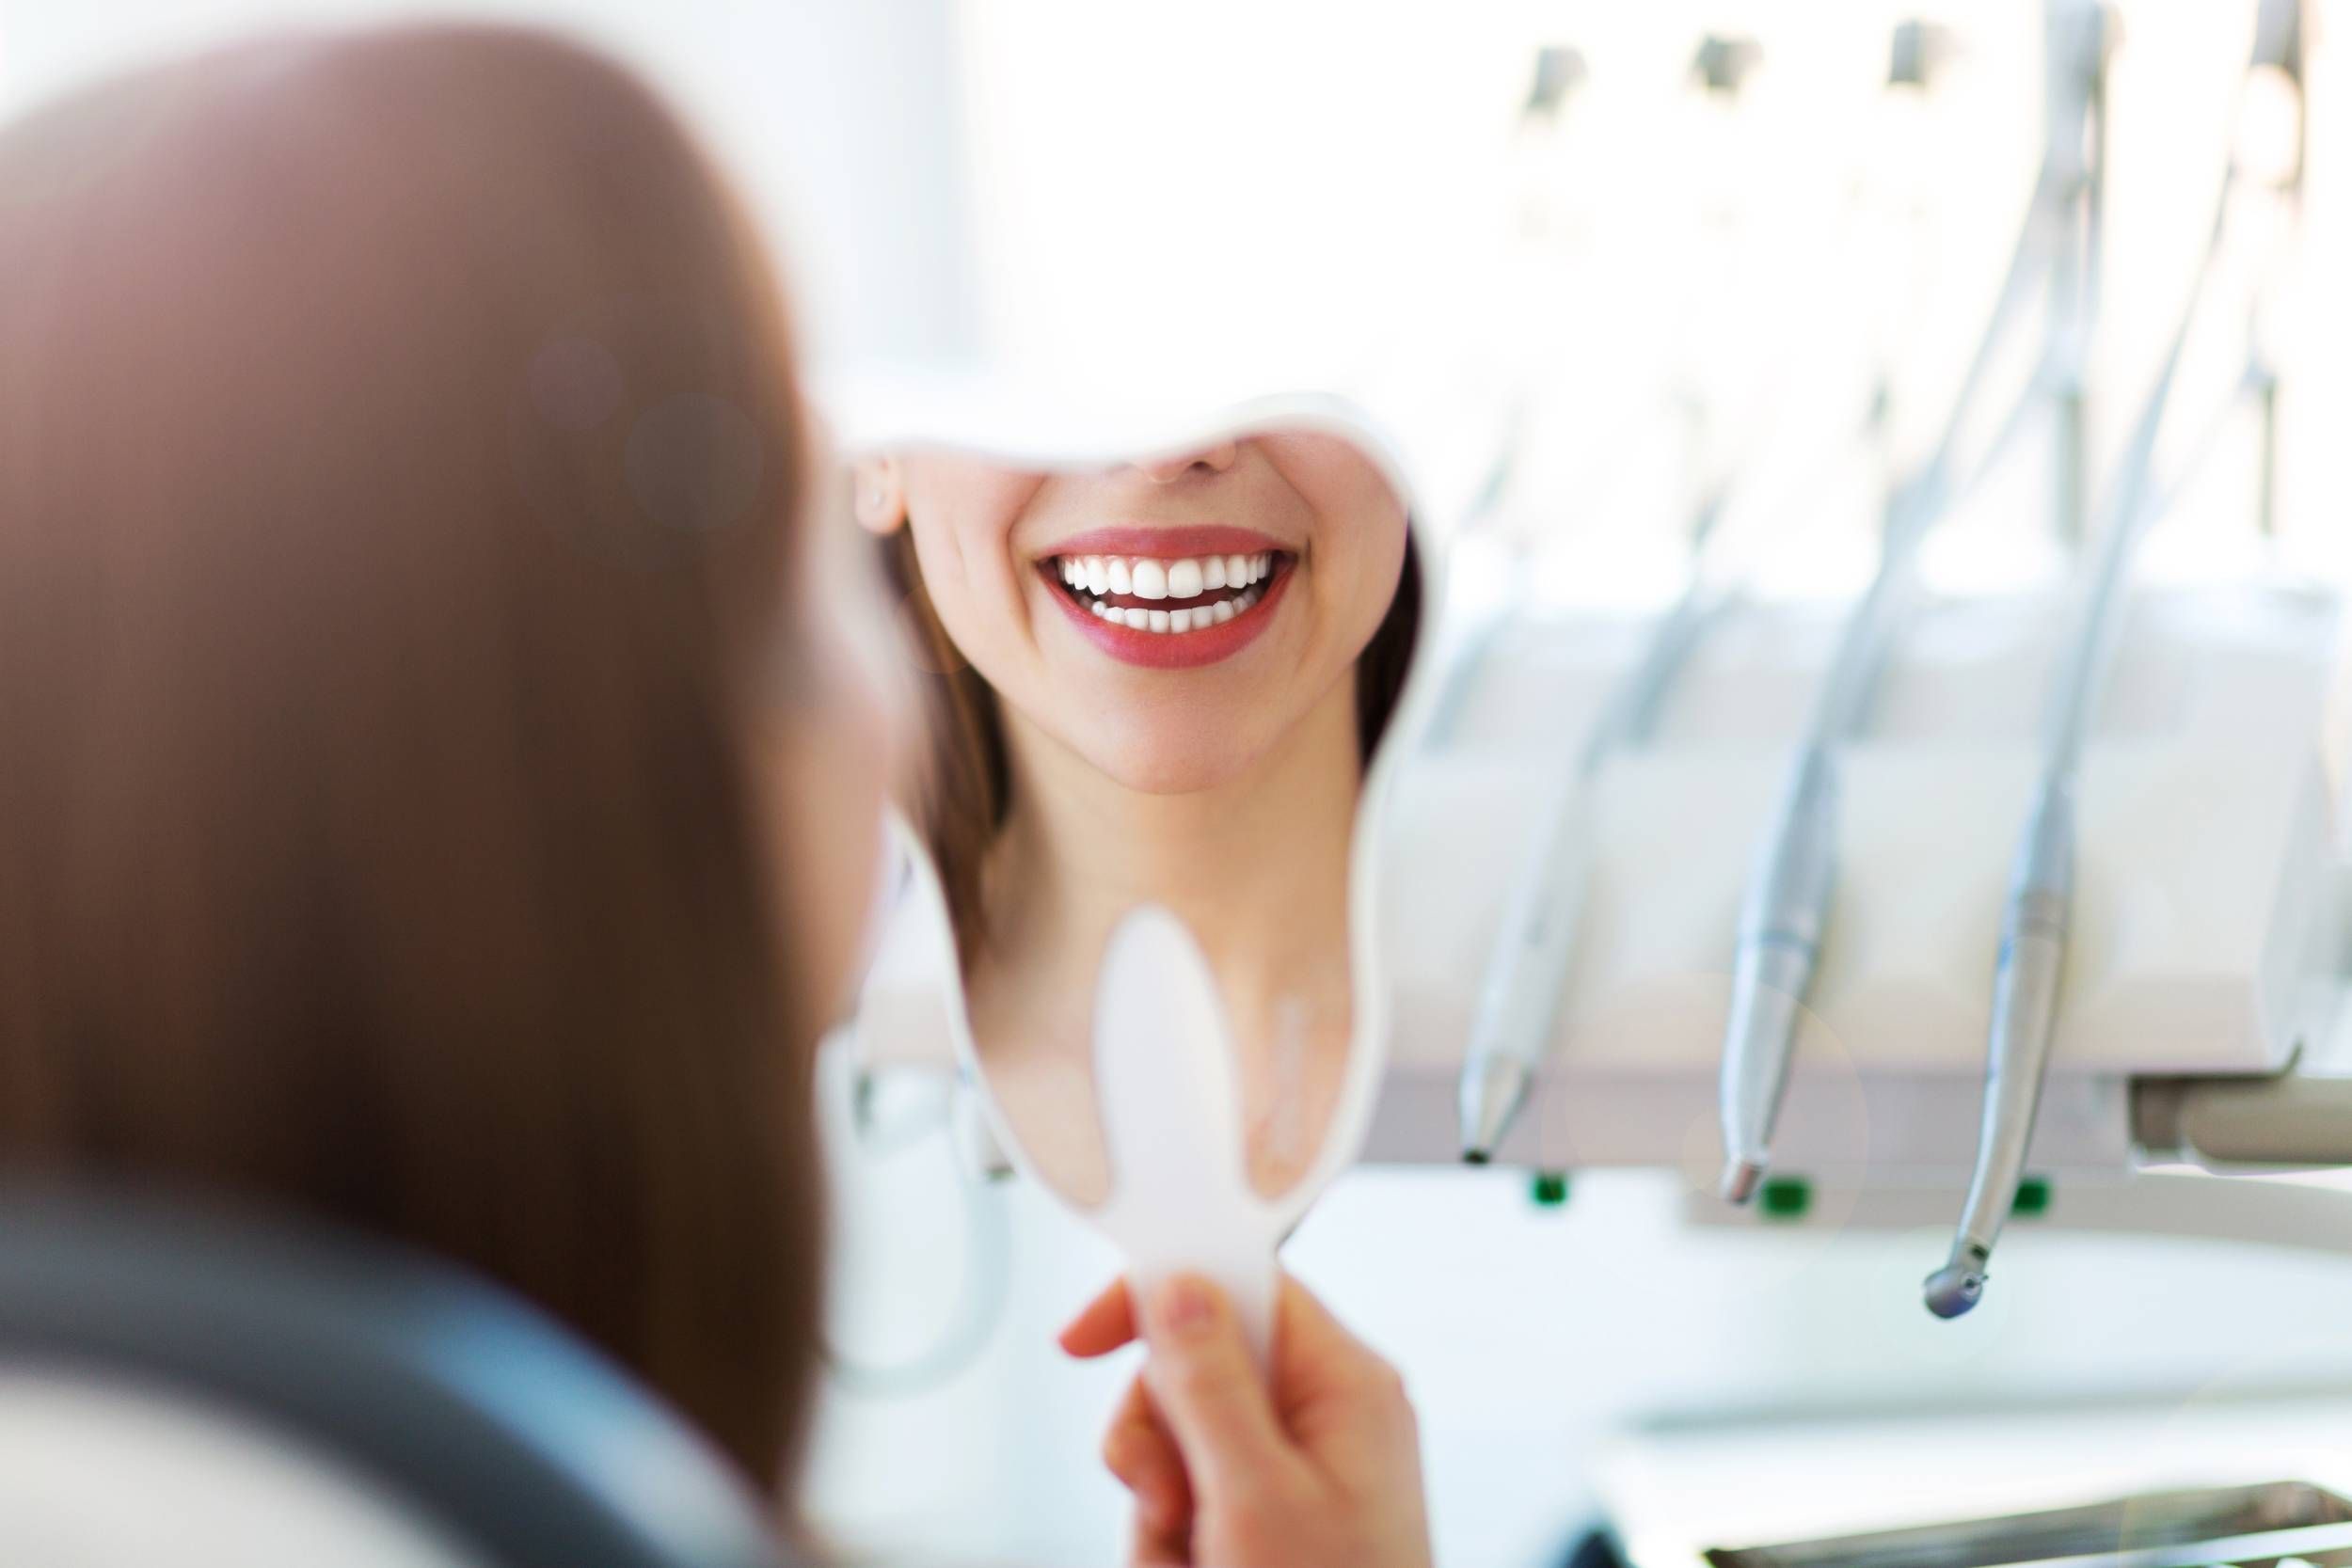 The Tooth Decay Process: How to Reverse It and Avoid a Cavity